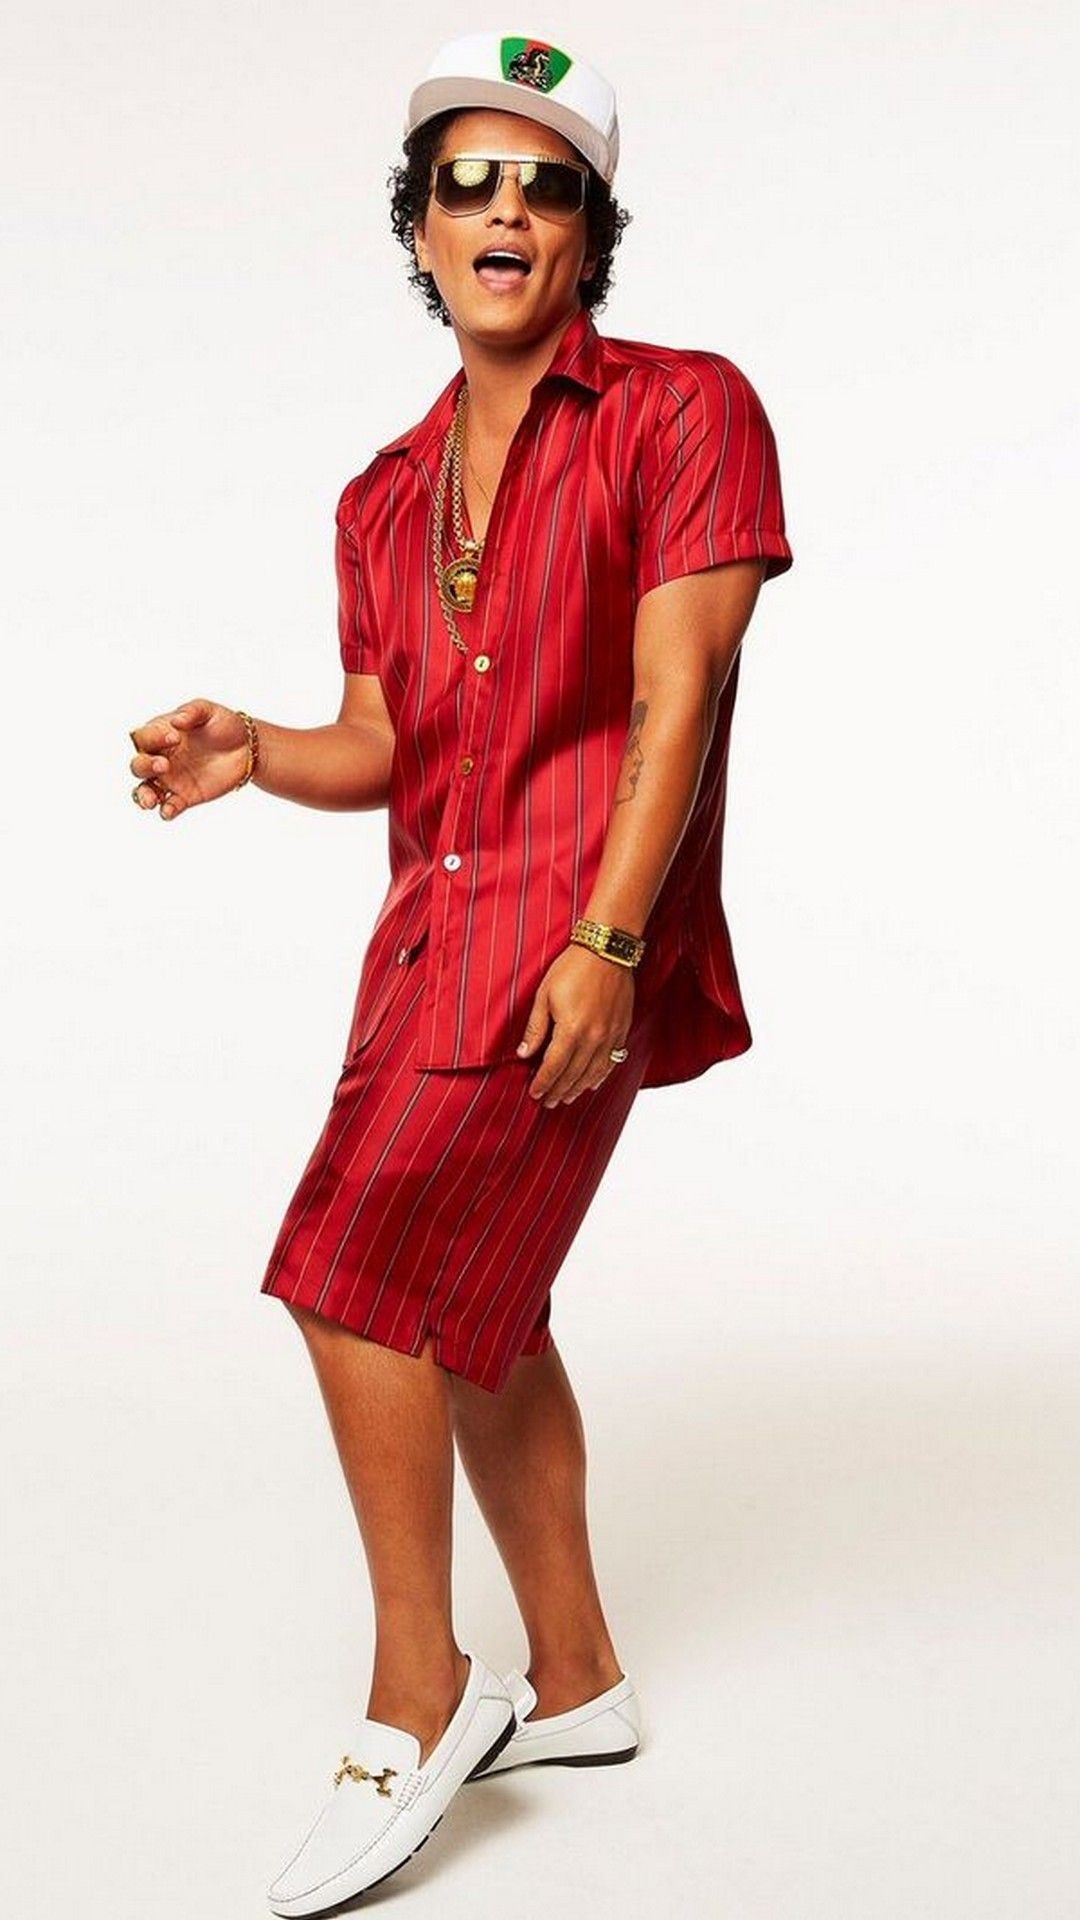 Bruno Mars, 24k wallpapers, High-definition images, Impressive backgrounds, 1080x1920 Full HD Phone